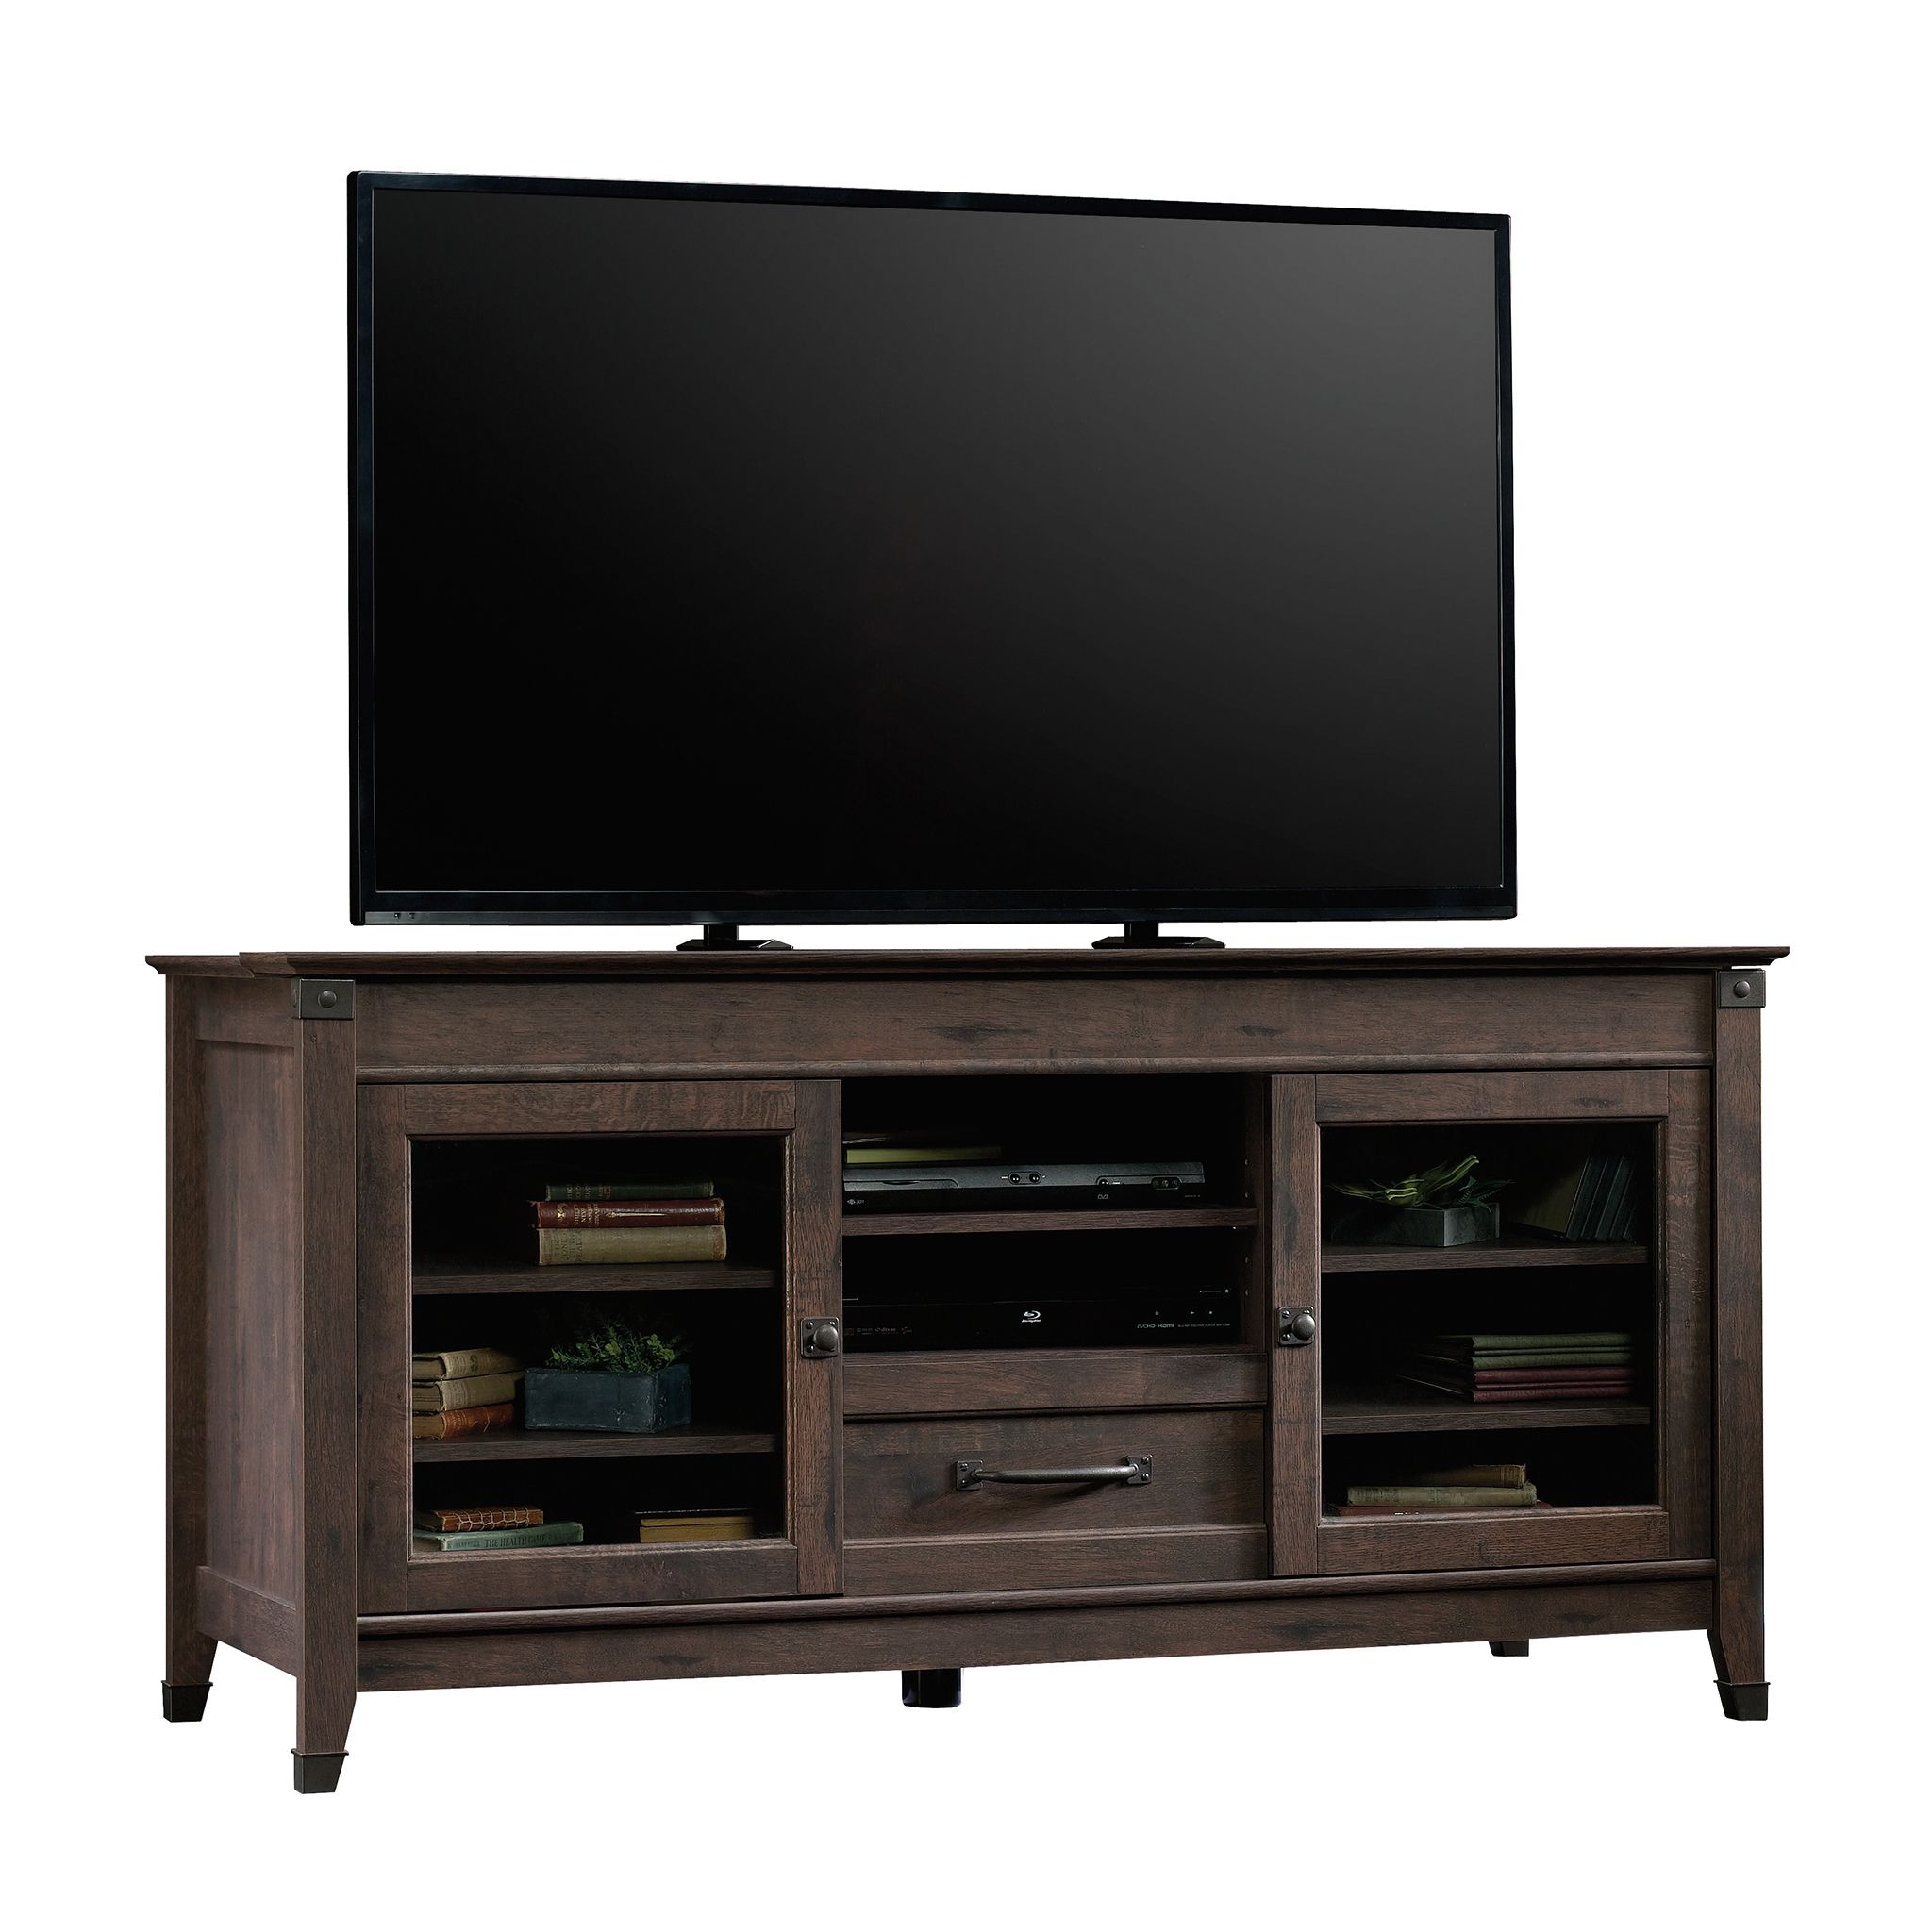 Sauder Carson Forge Tv Stand For Tvs Up To 60", Coffee Oak With 60" Corner Tv Stands Washed Oak (Photo 10 of 15)